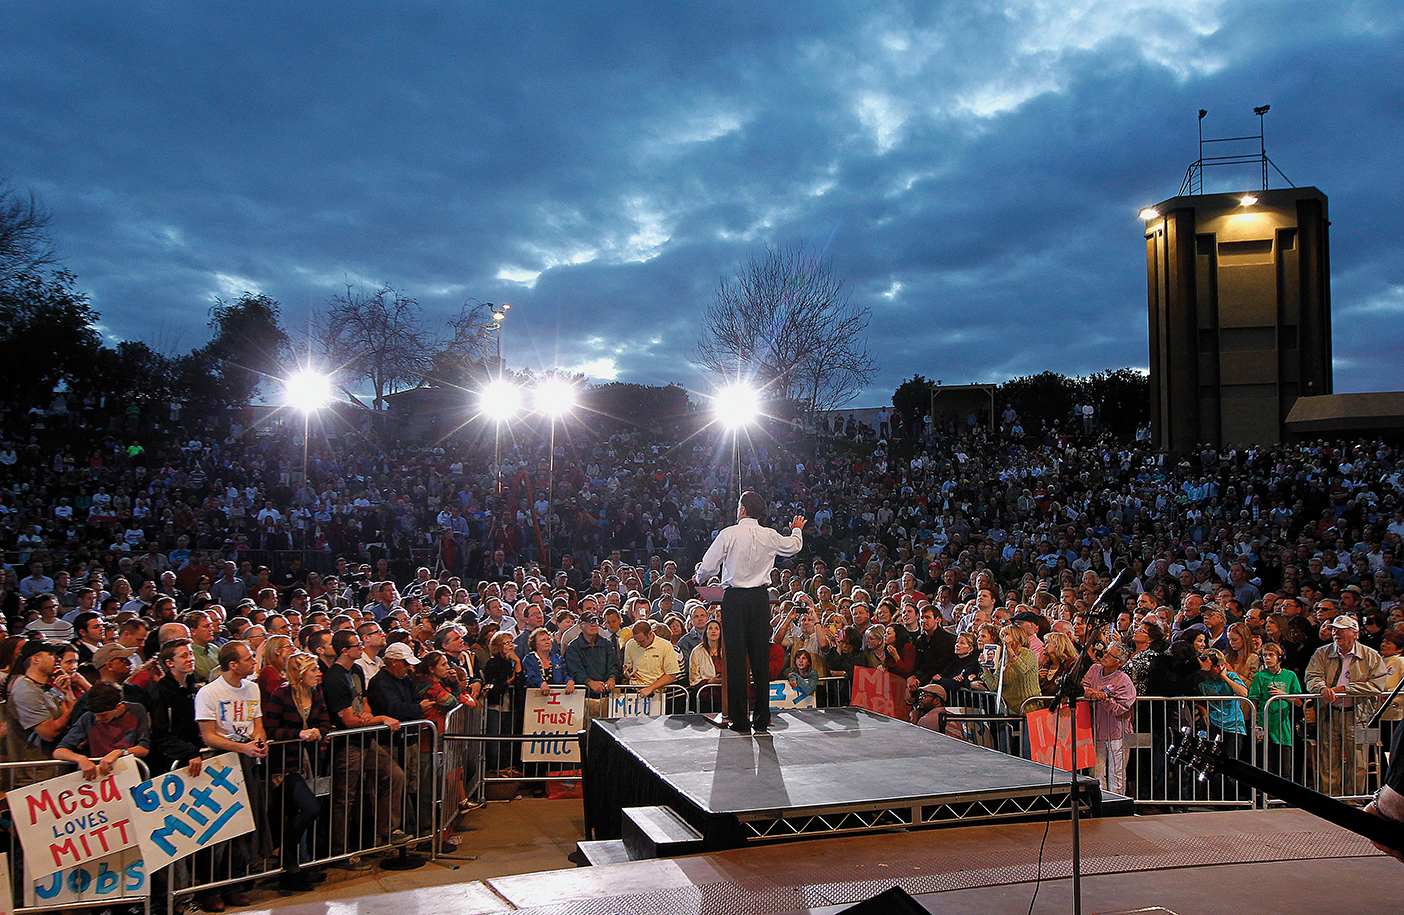 Romney stands on a stage in front of a large crowd during his presidential campaign